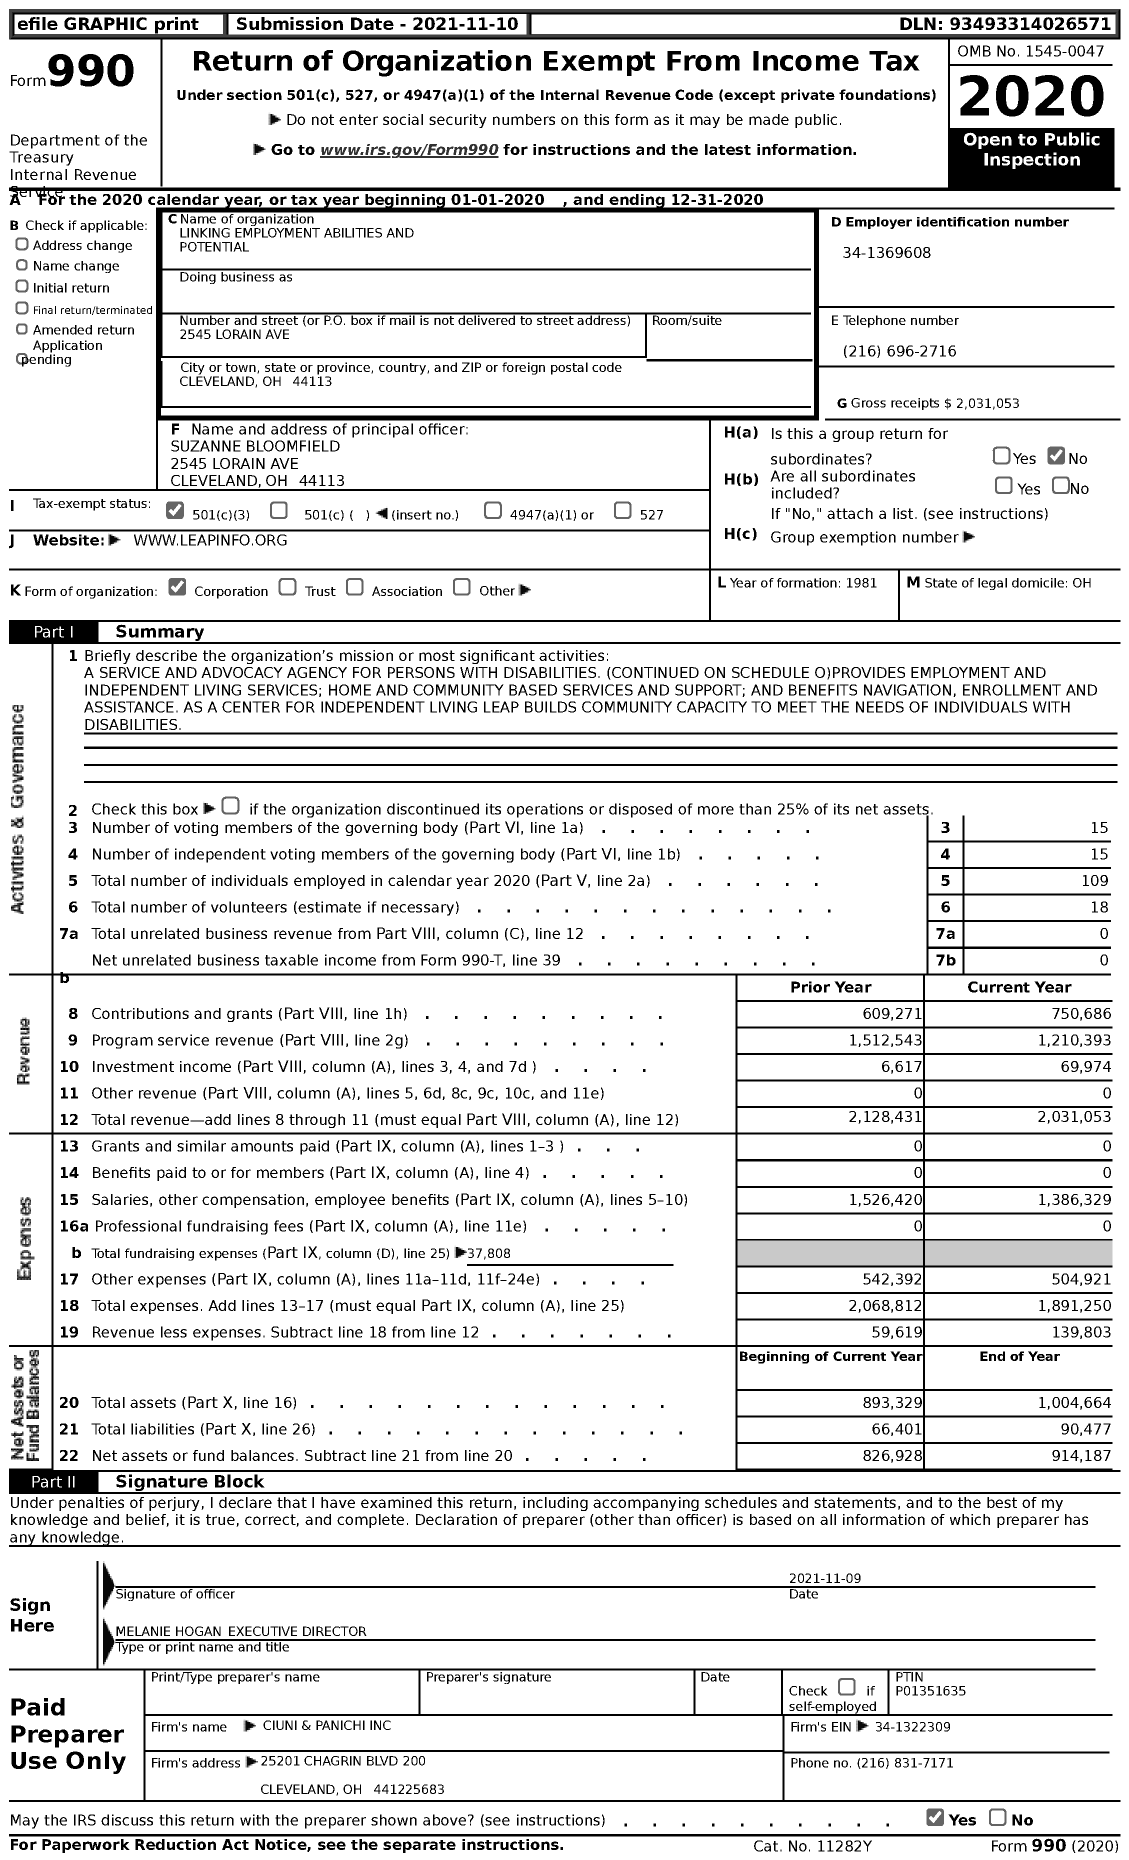 Image of first page of 2020 Form 990 for Linking Employment Abilities and Potential